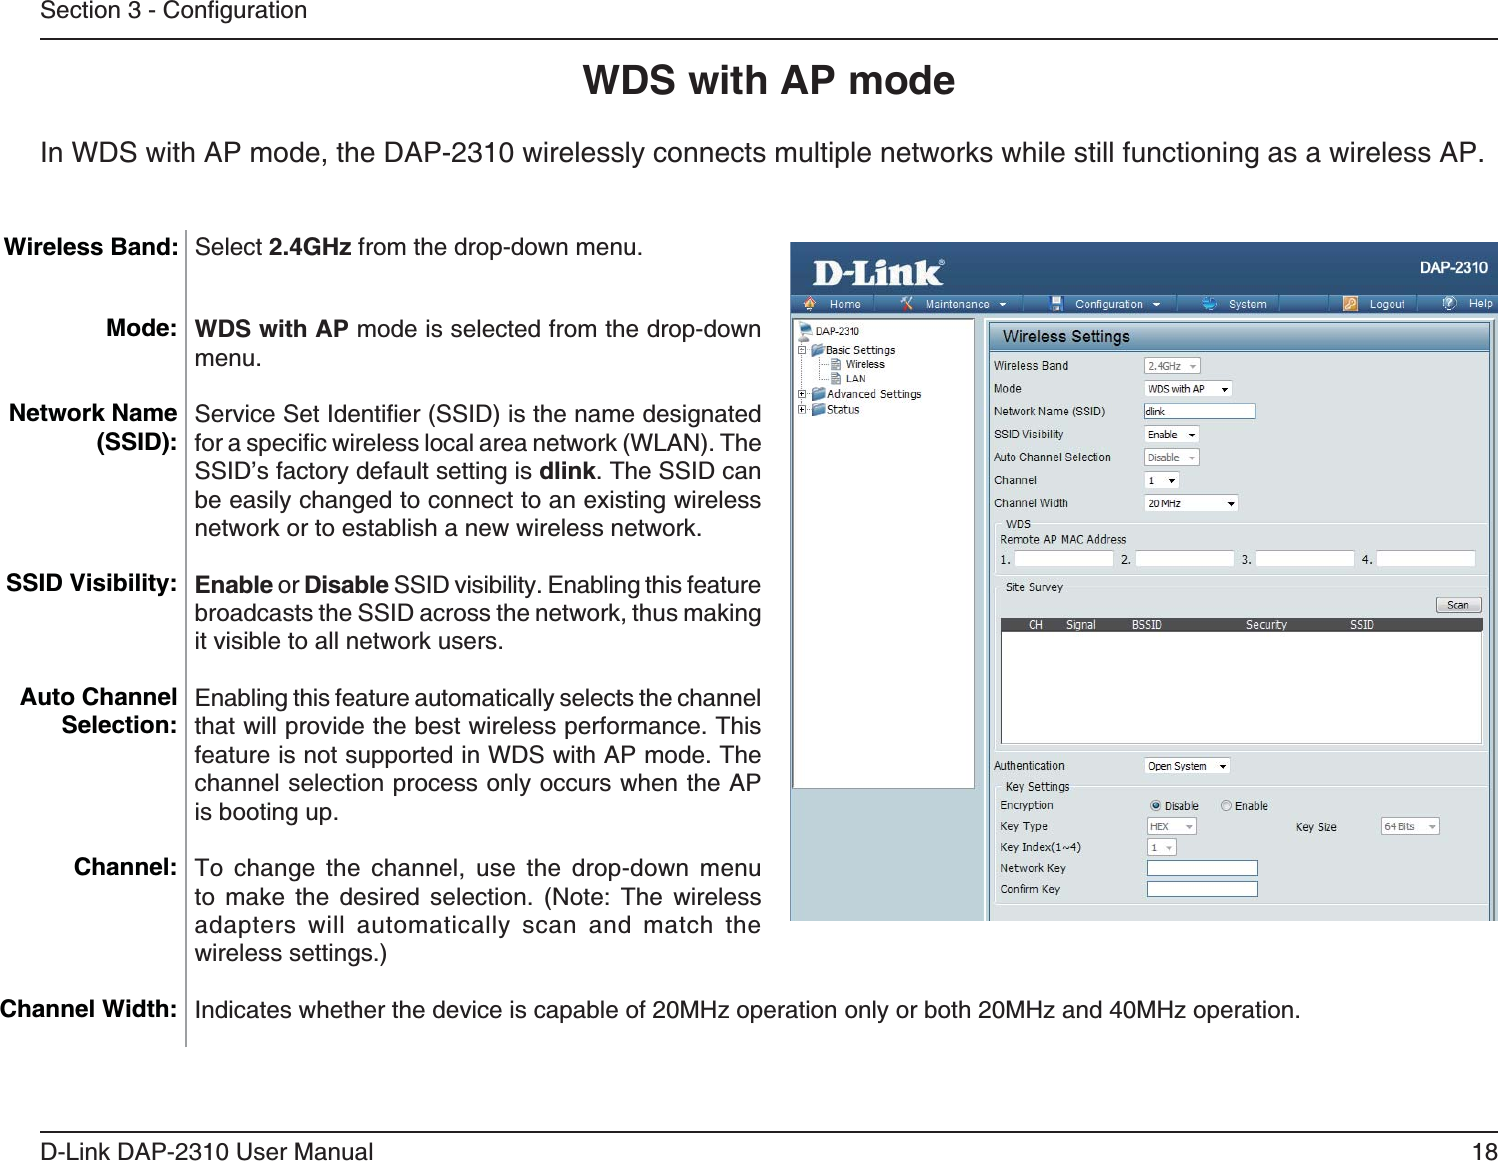 18D-Link DAP-2310 User ManualWDS with AP mode WDS with AP mode is selected from the drop-down menu.SSID’s factory default setting is dlink. The SSID can be easily changed to connect to an existing wireless network or to establish a new wireless network.Enable or Disable SSID visibility. Enabling this feature broadcasts the SSID across the network, thus making it visible to all network users.Enabling this feature automatically selects the channel that will provide the best wireless performance. This feature is not supported in WDS with AP mode. The channel selection process only occurs when the AP is booting up.To change the channel, use the drop-down menu        adapters will automatically scan and match the wireless settings.)      Mode:Network Name (SSID):SSID Visibility:Auto Channel Selection:Channel:Channel Width:Wireless Band:In WDS with AP mode, the DAP-2310 wirelessly connects multiple networks while still functioning as a wireless AP.Select 2.4GHz from the drop-down menu. 